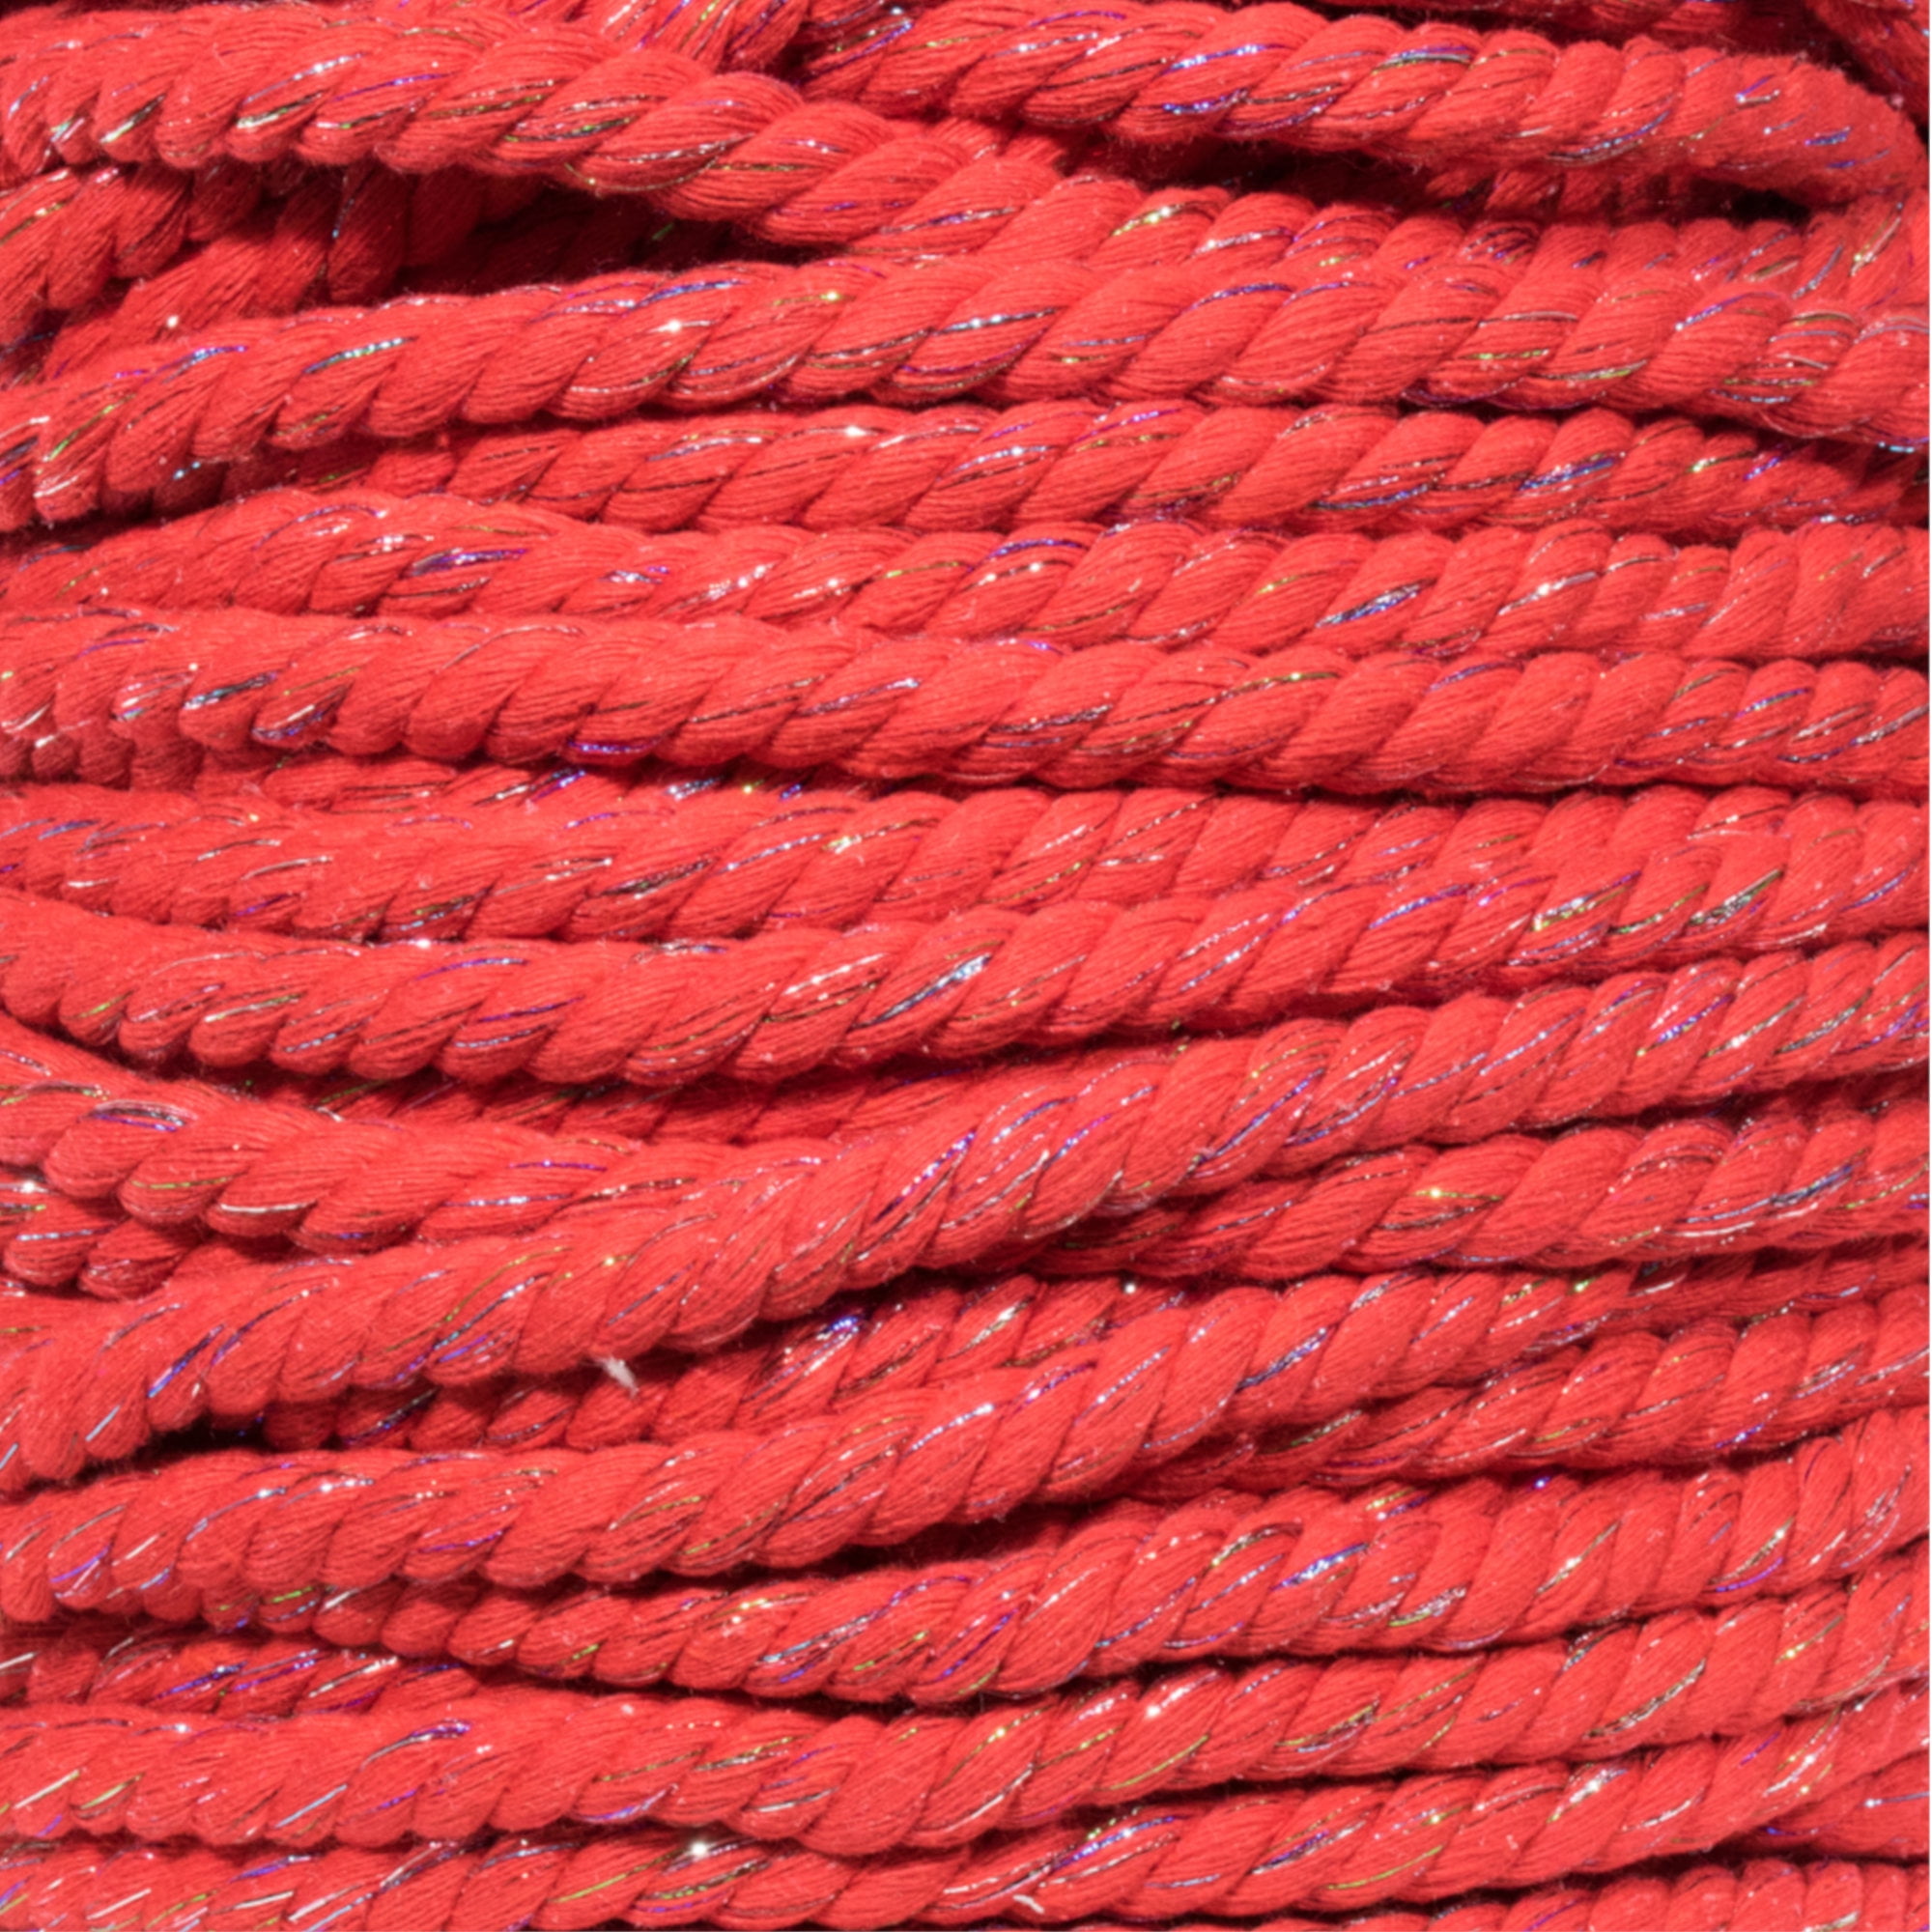 Super Soft 3 Strand Twisted Cotton Rope Wine Red, 1/4 Inch x 25 Feet 